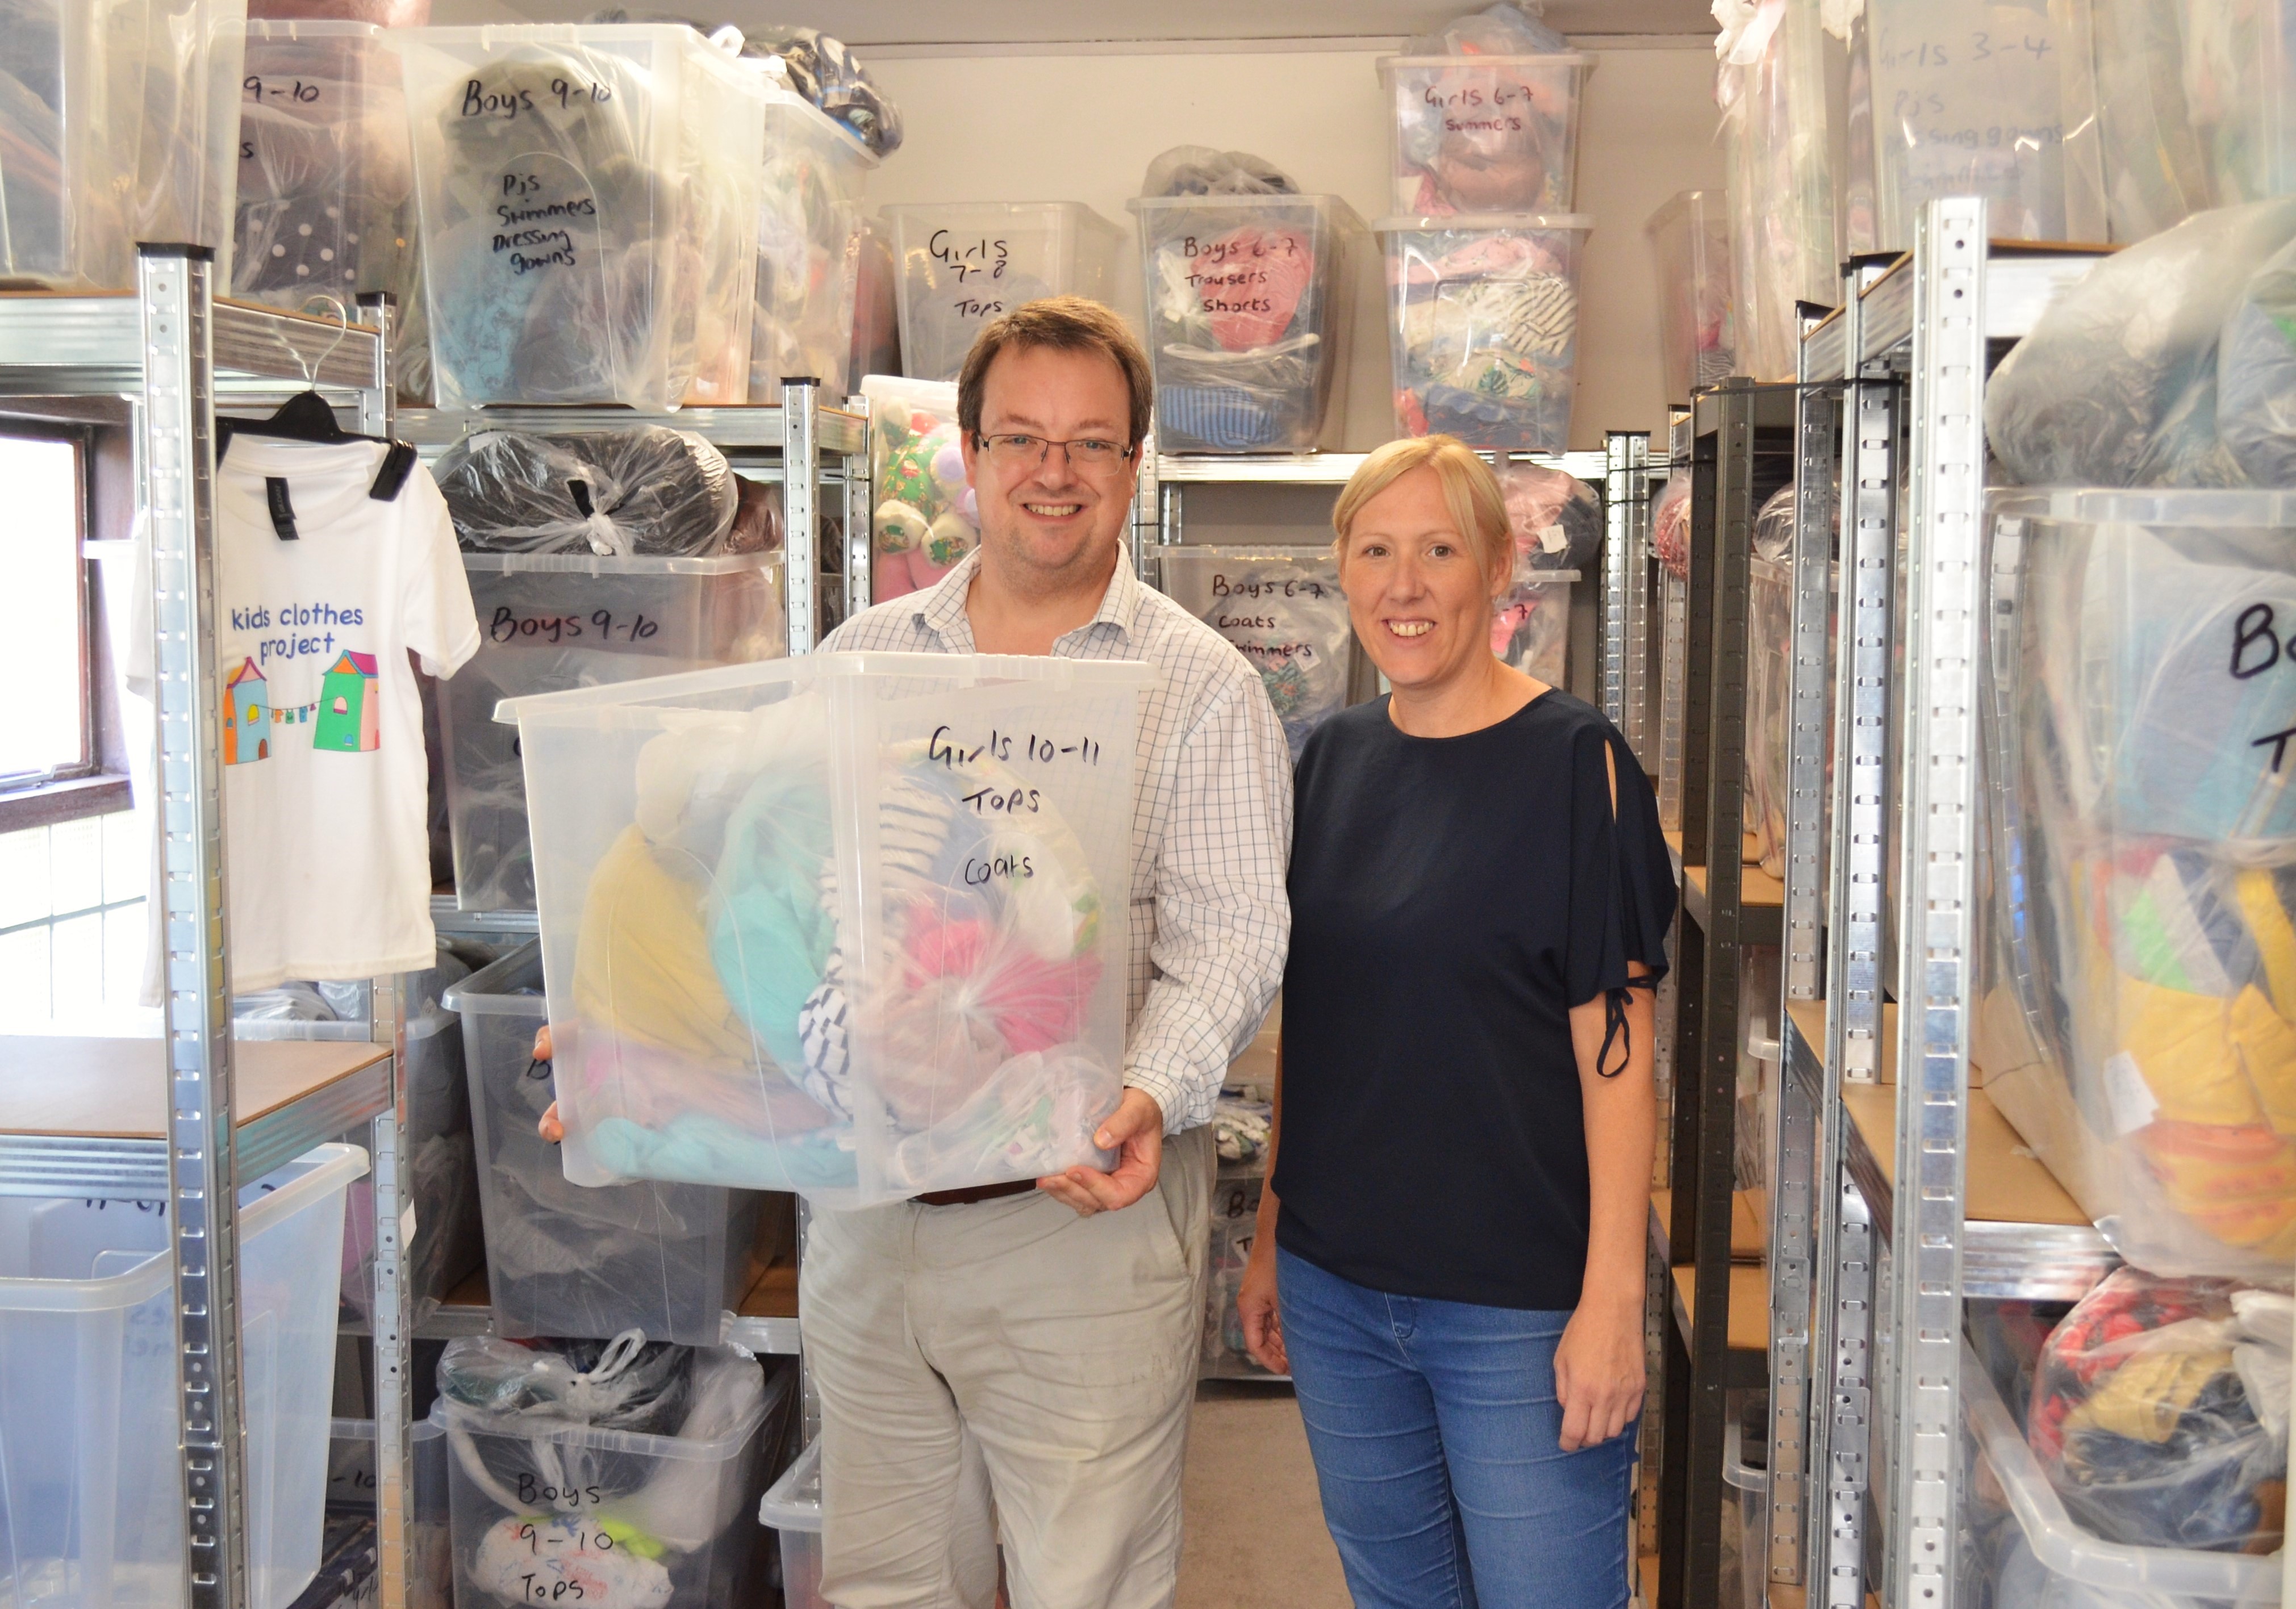 Mike Wood MP with Katie Ashby from Kids Clothes Project